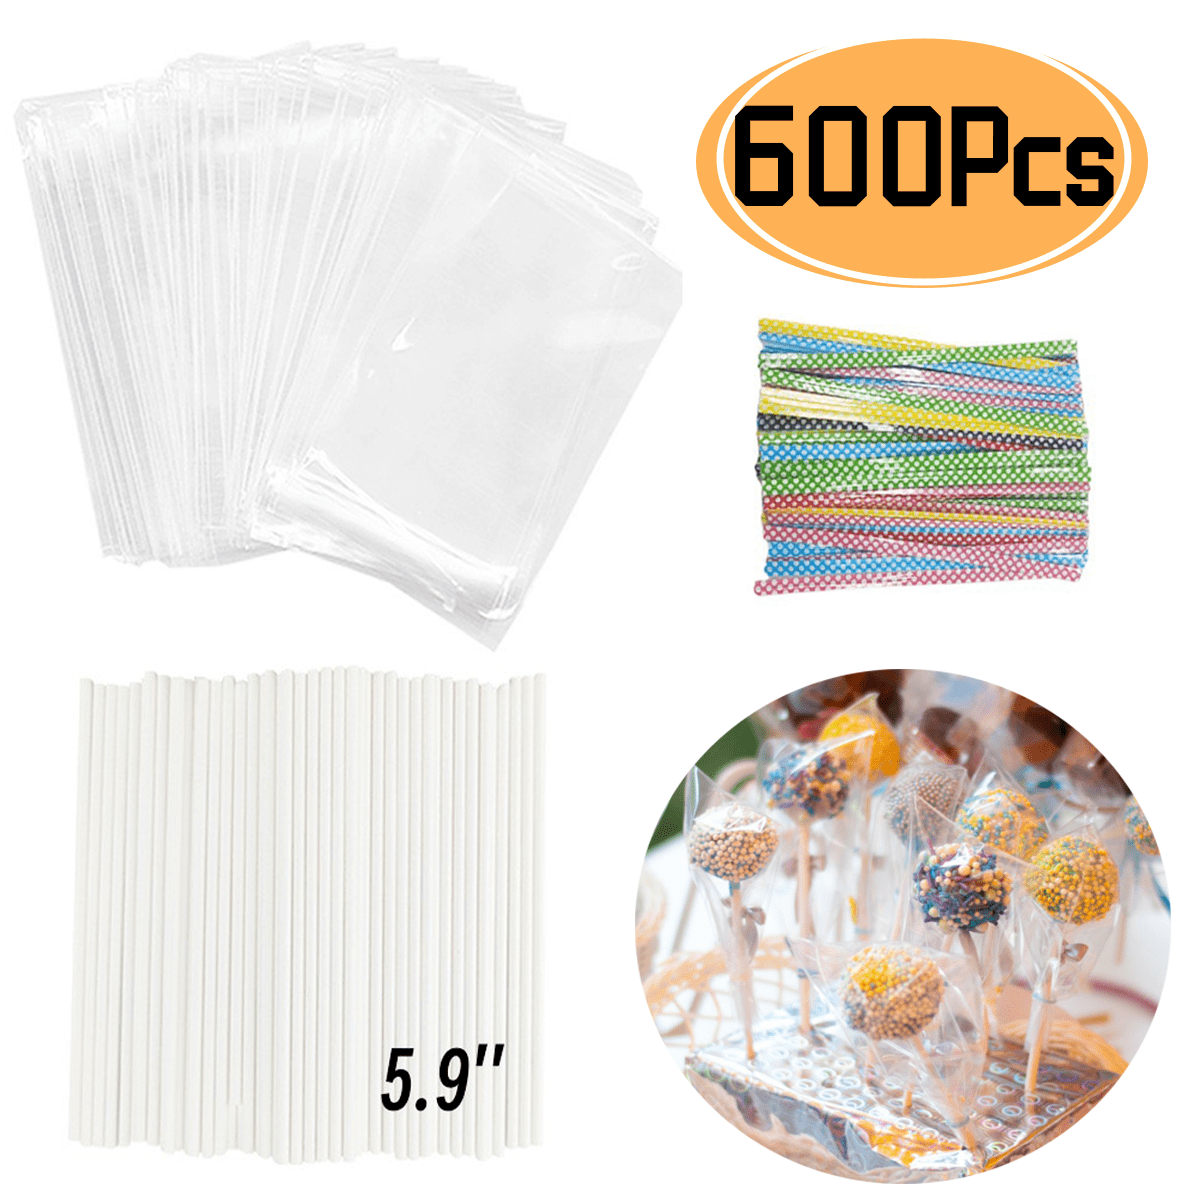 360 PCS Cake Pop Sticks and Wrappers Ties Kit, Including 120ct 6-inch Paper  Lollipop Sticks, 120ct Cake Pop Parcel Bags, 100ct Silver Twist Ties for